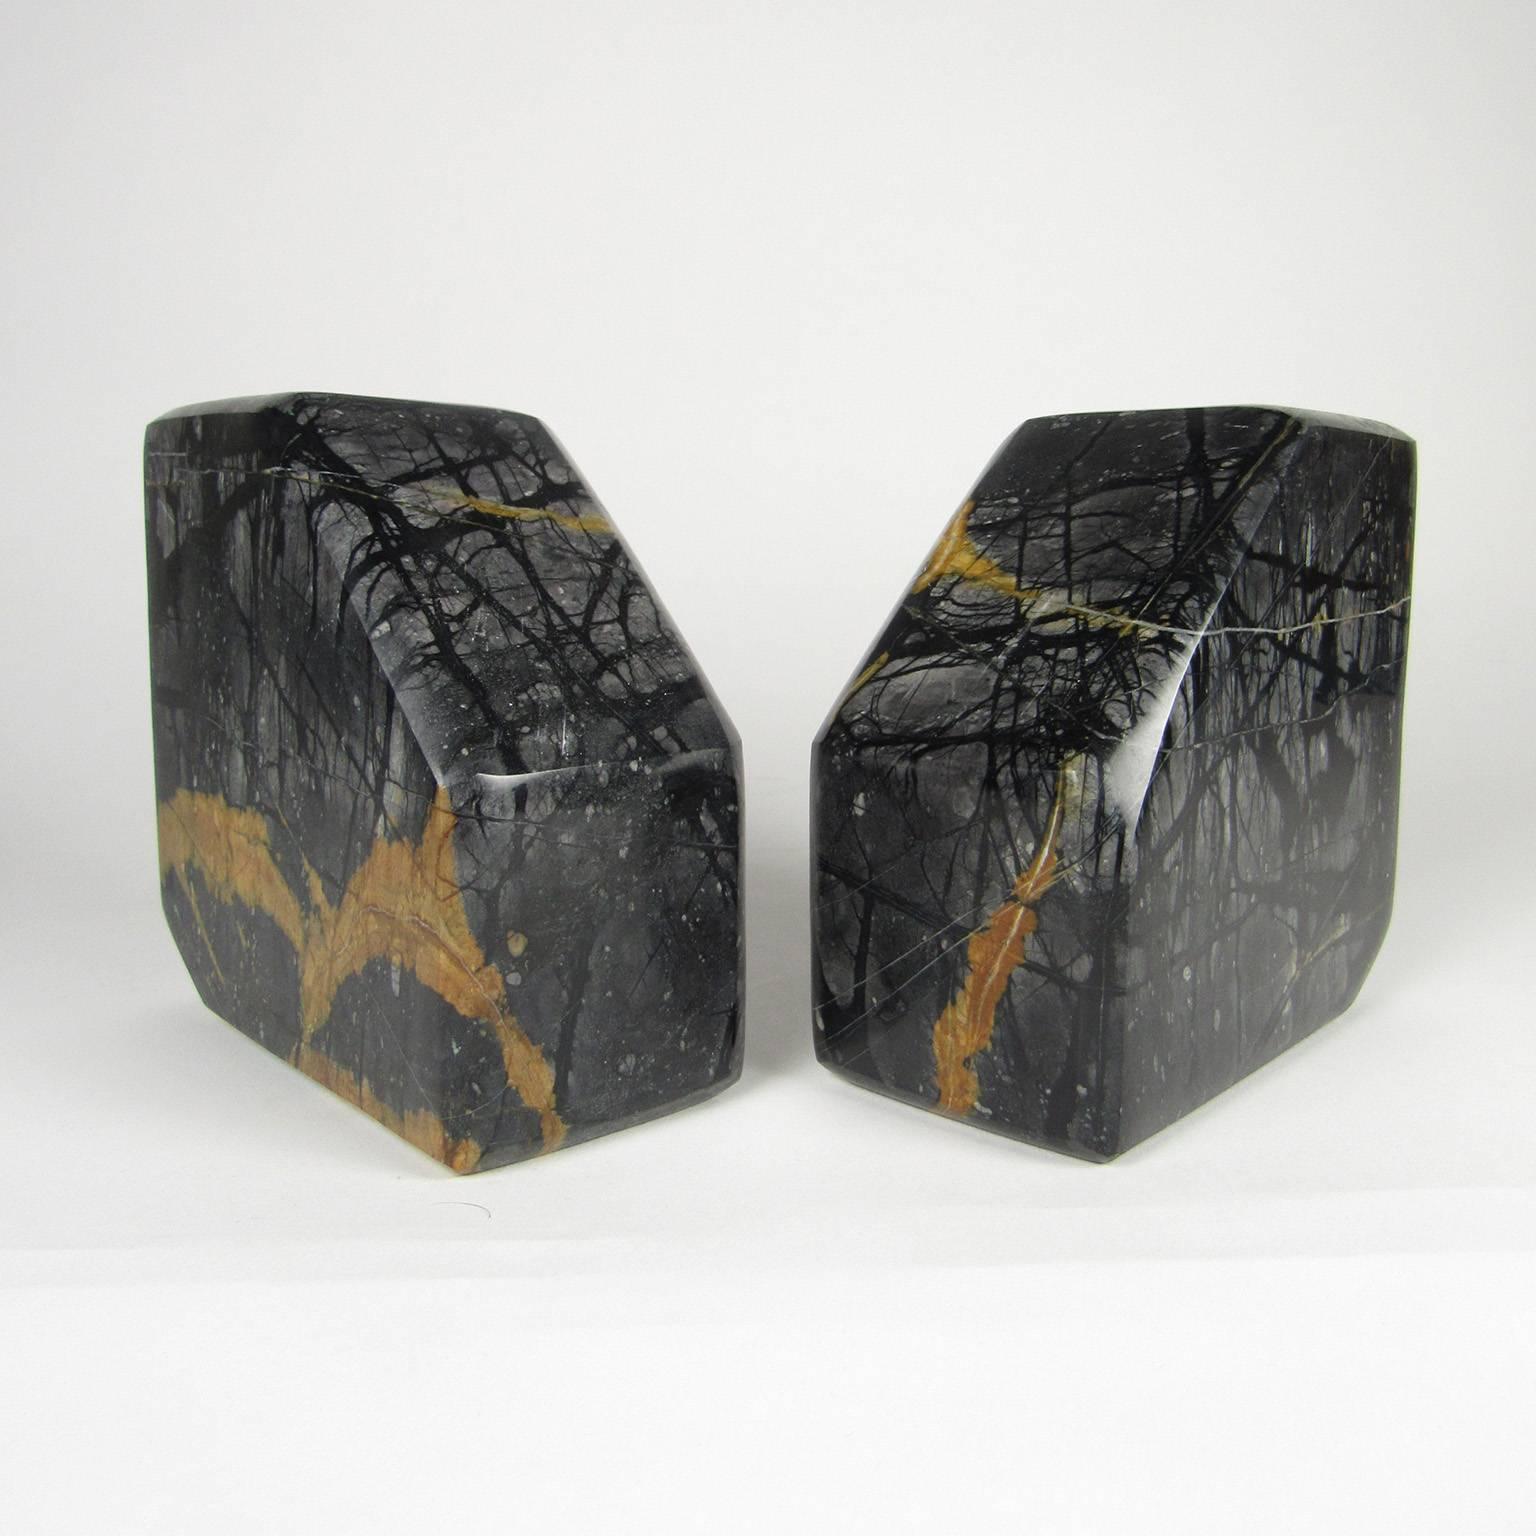 Pair of variegated black marble bookends. 
Measures: 5 1/2 x 5 1/2 x 2 3/4 inches.